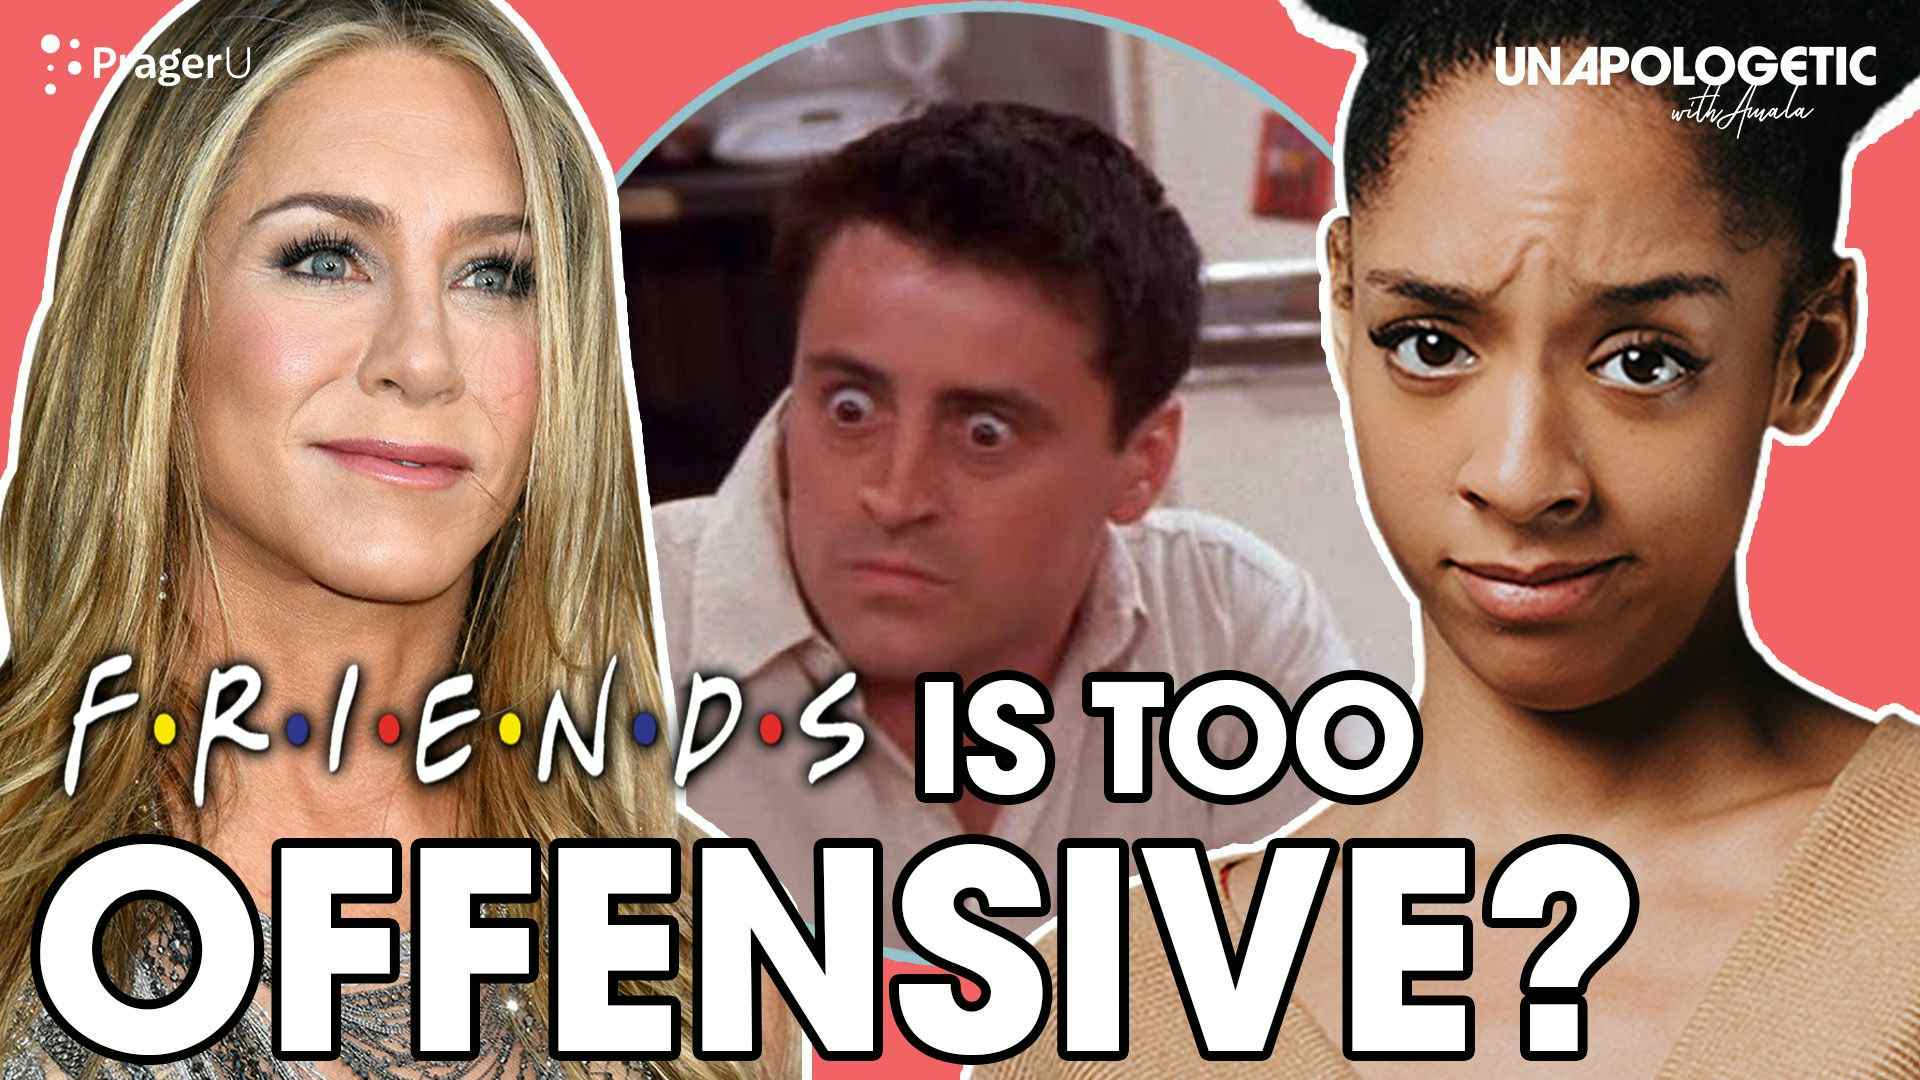 Jennifer Aniston Says “Friends” Is Too Offensive for Today: 4/4/2023